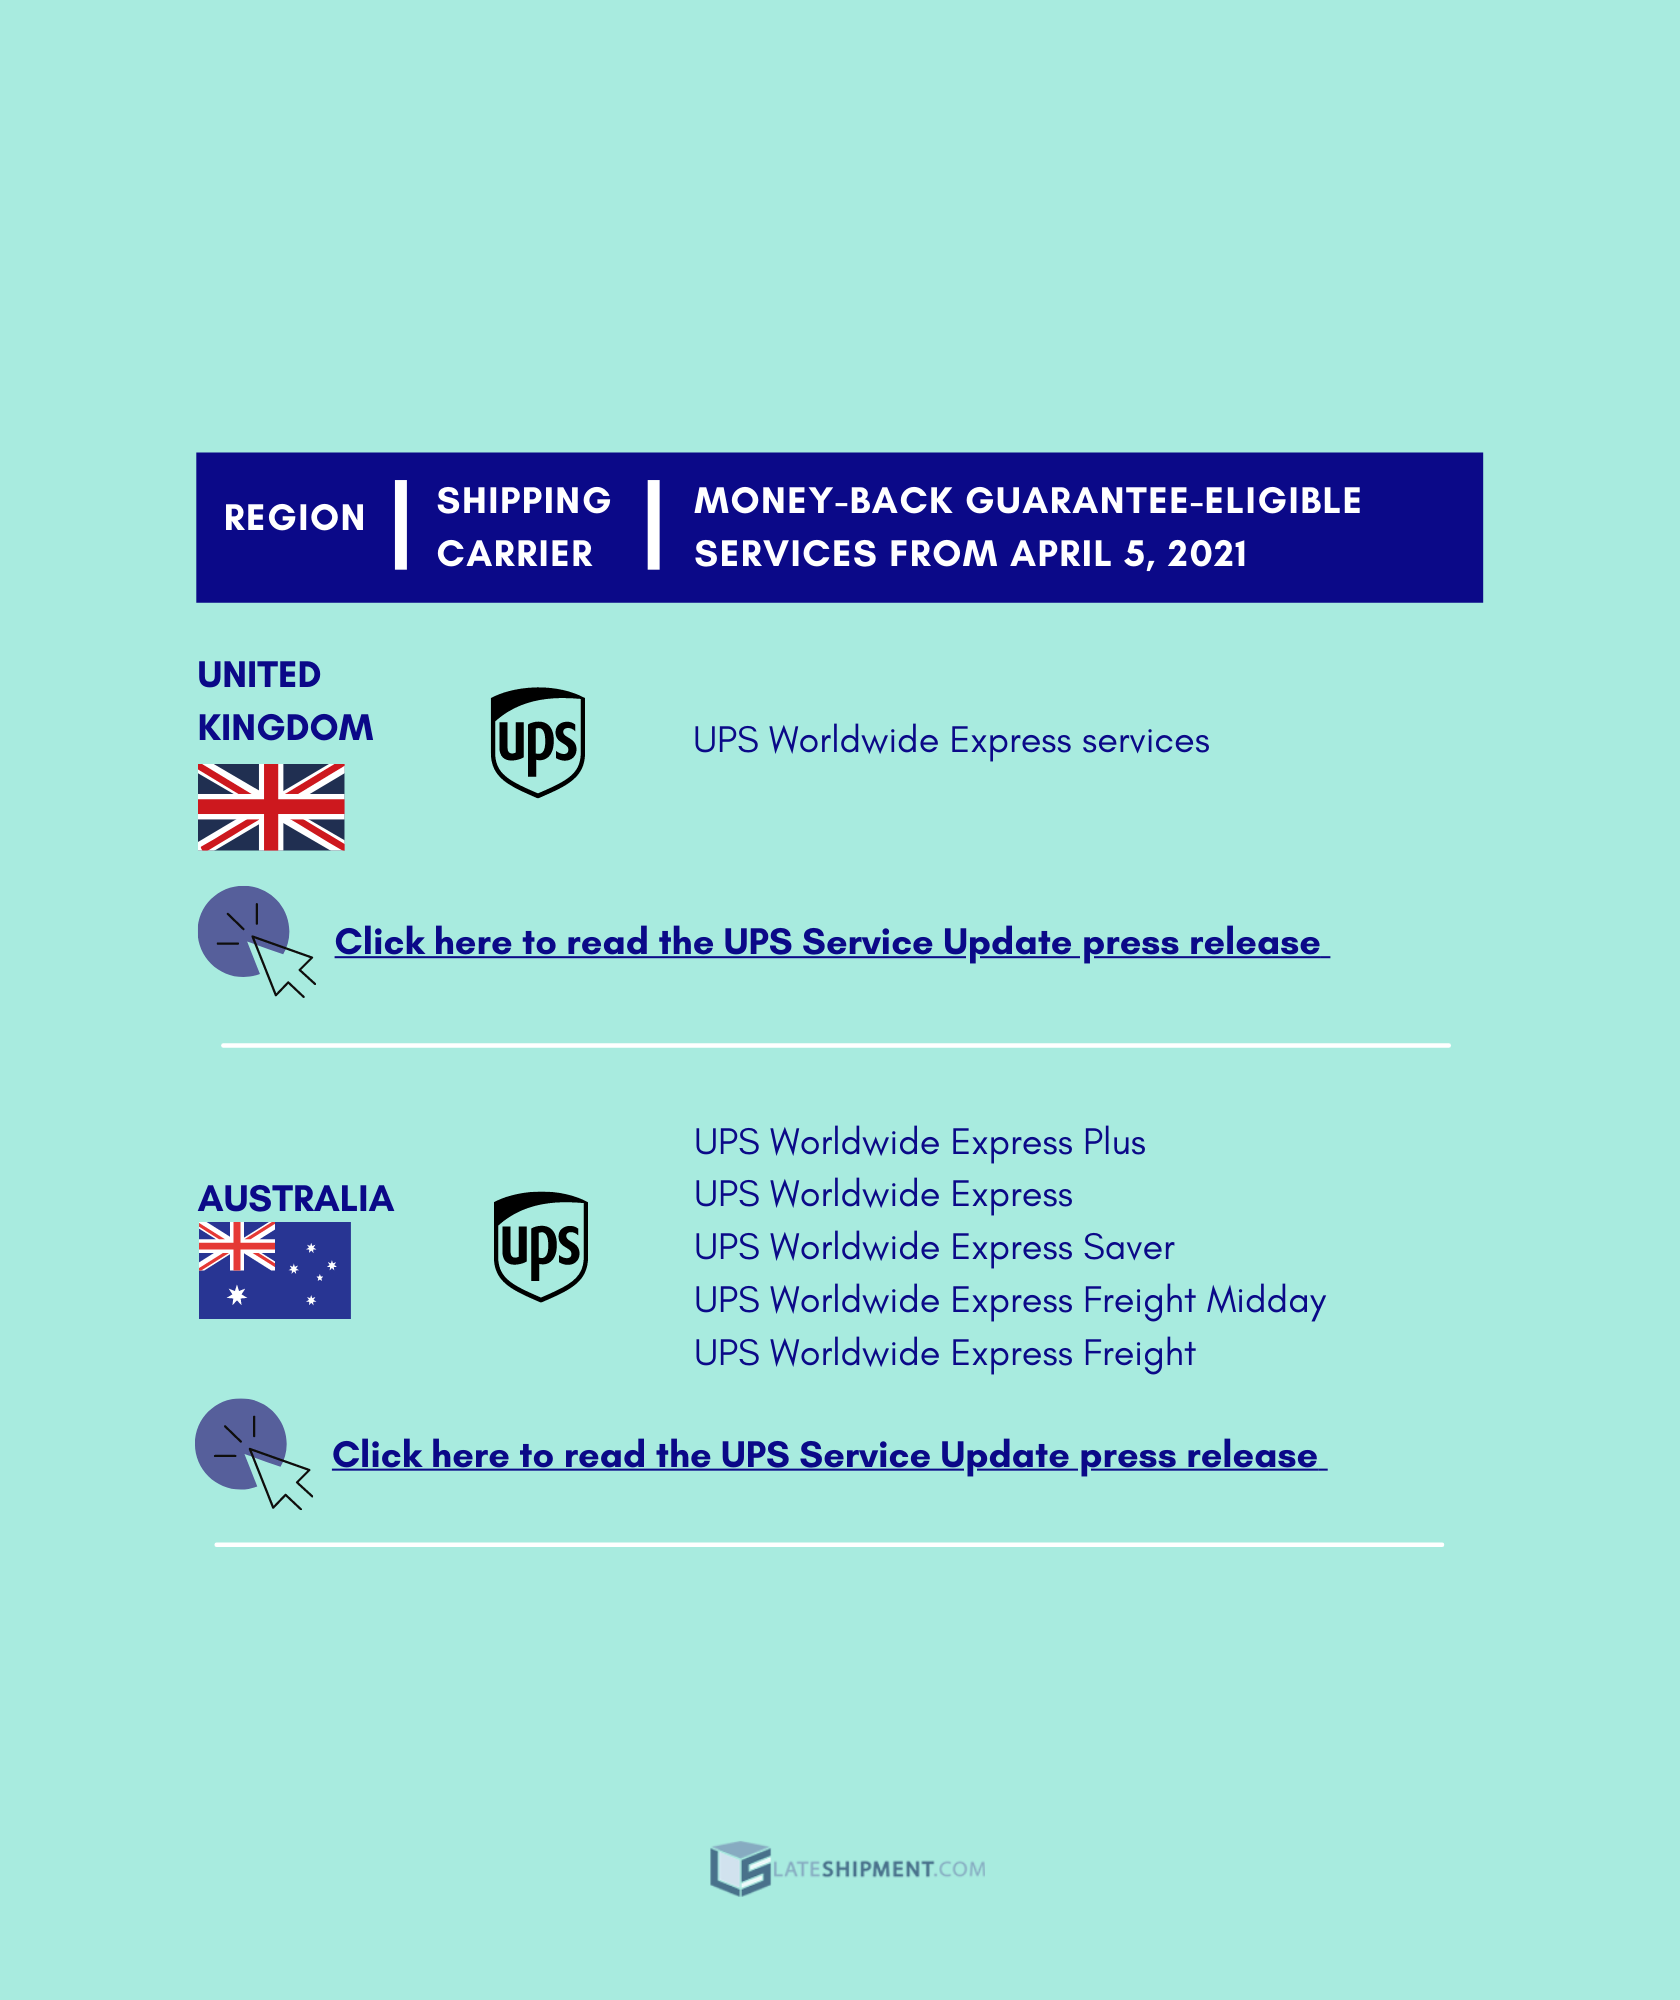 Money-back guarantee reinstated by UPS in the UK and Australia